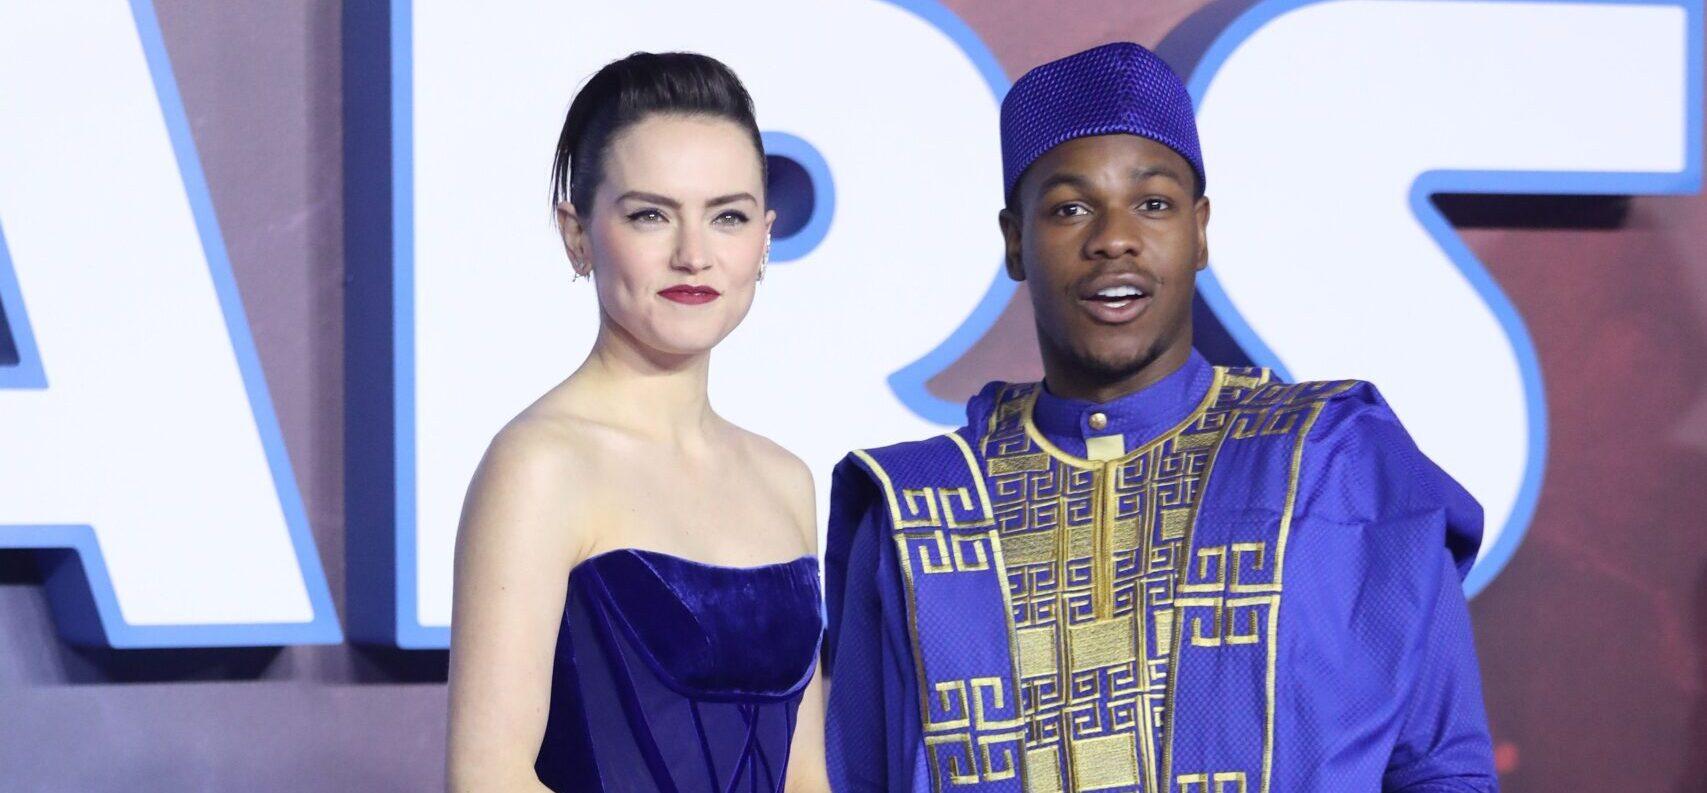 Daisy Ridley and John Boyega pose together at Star Wars premiere